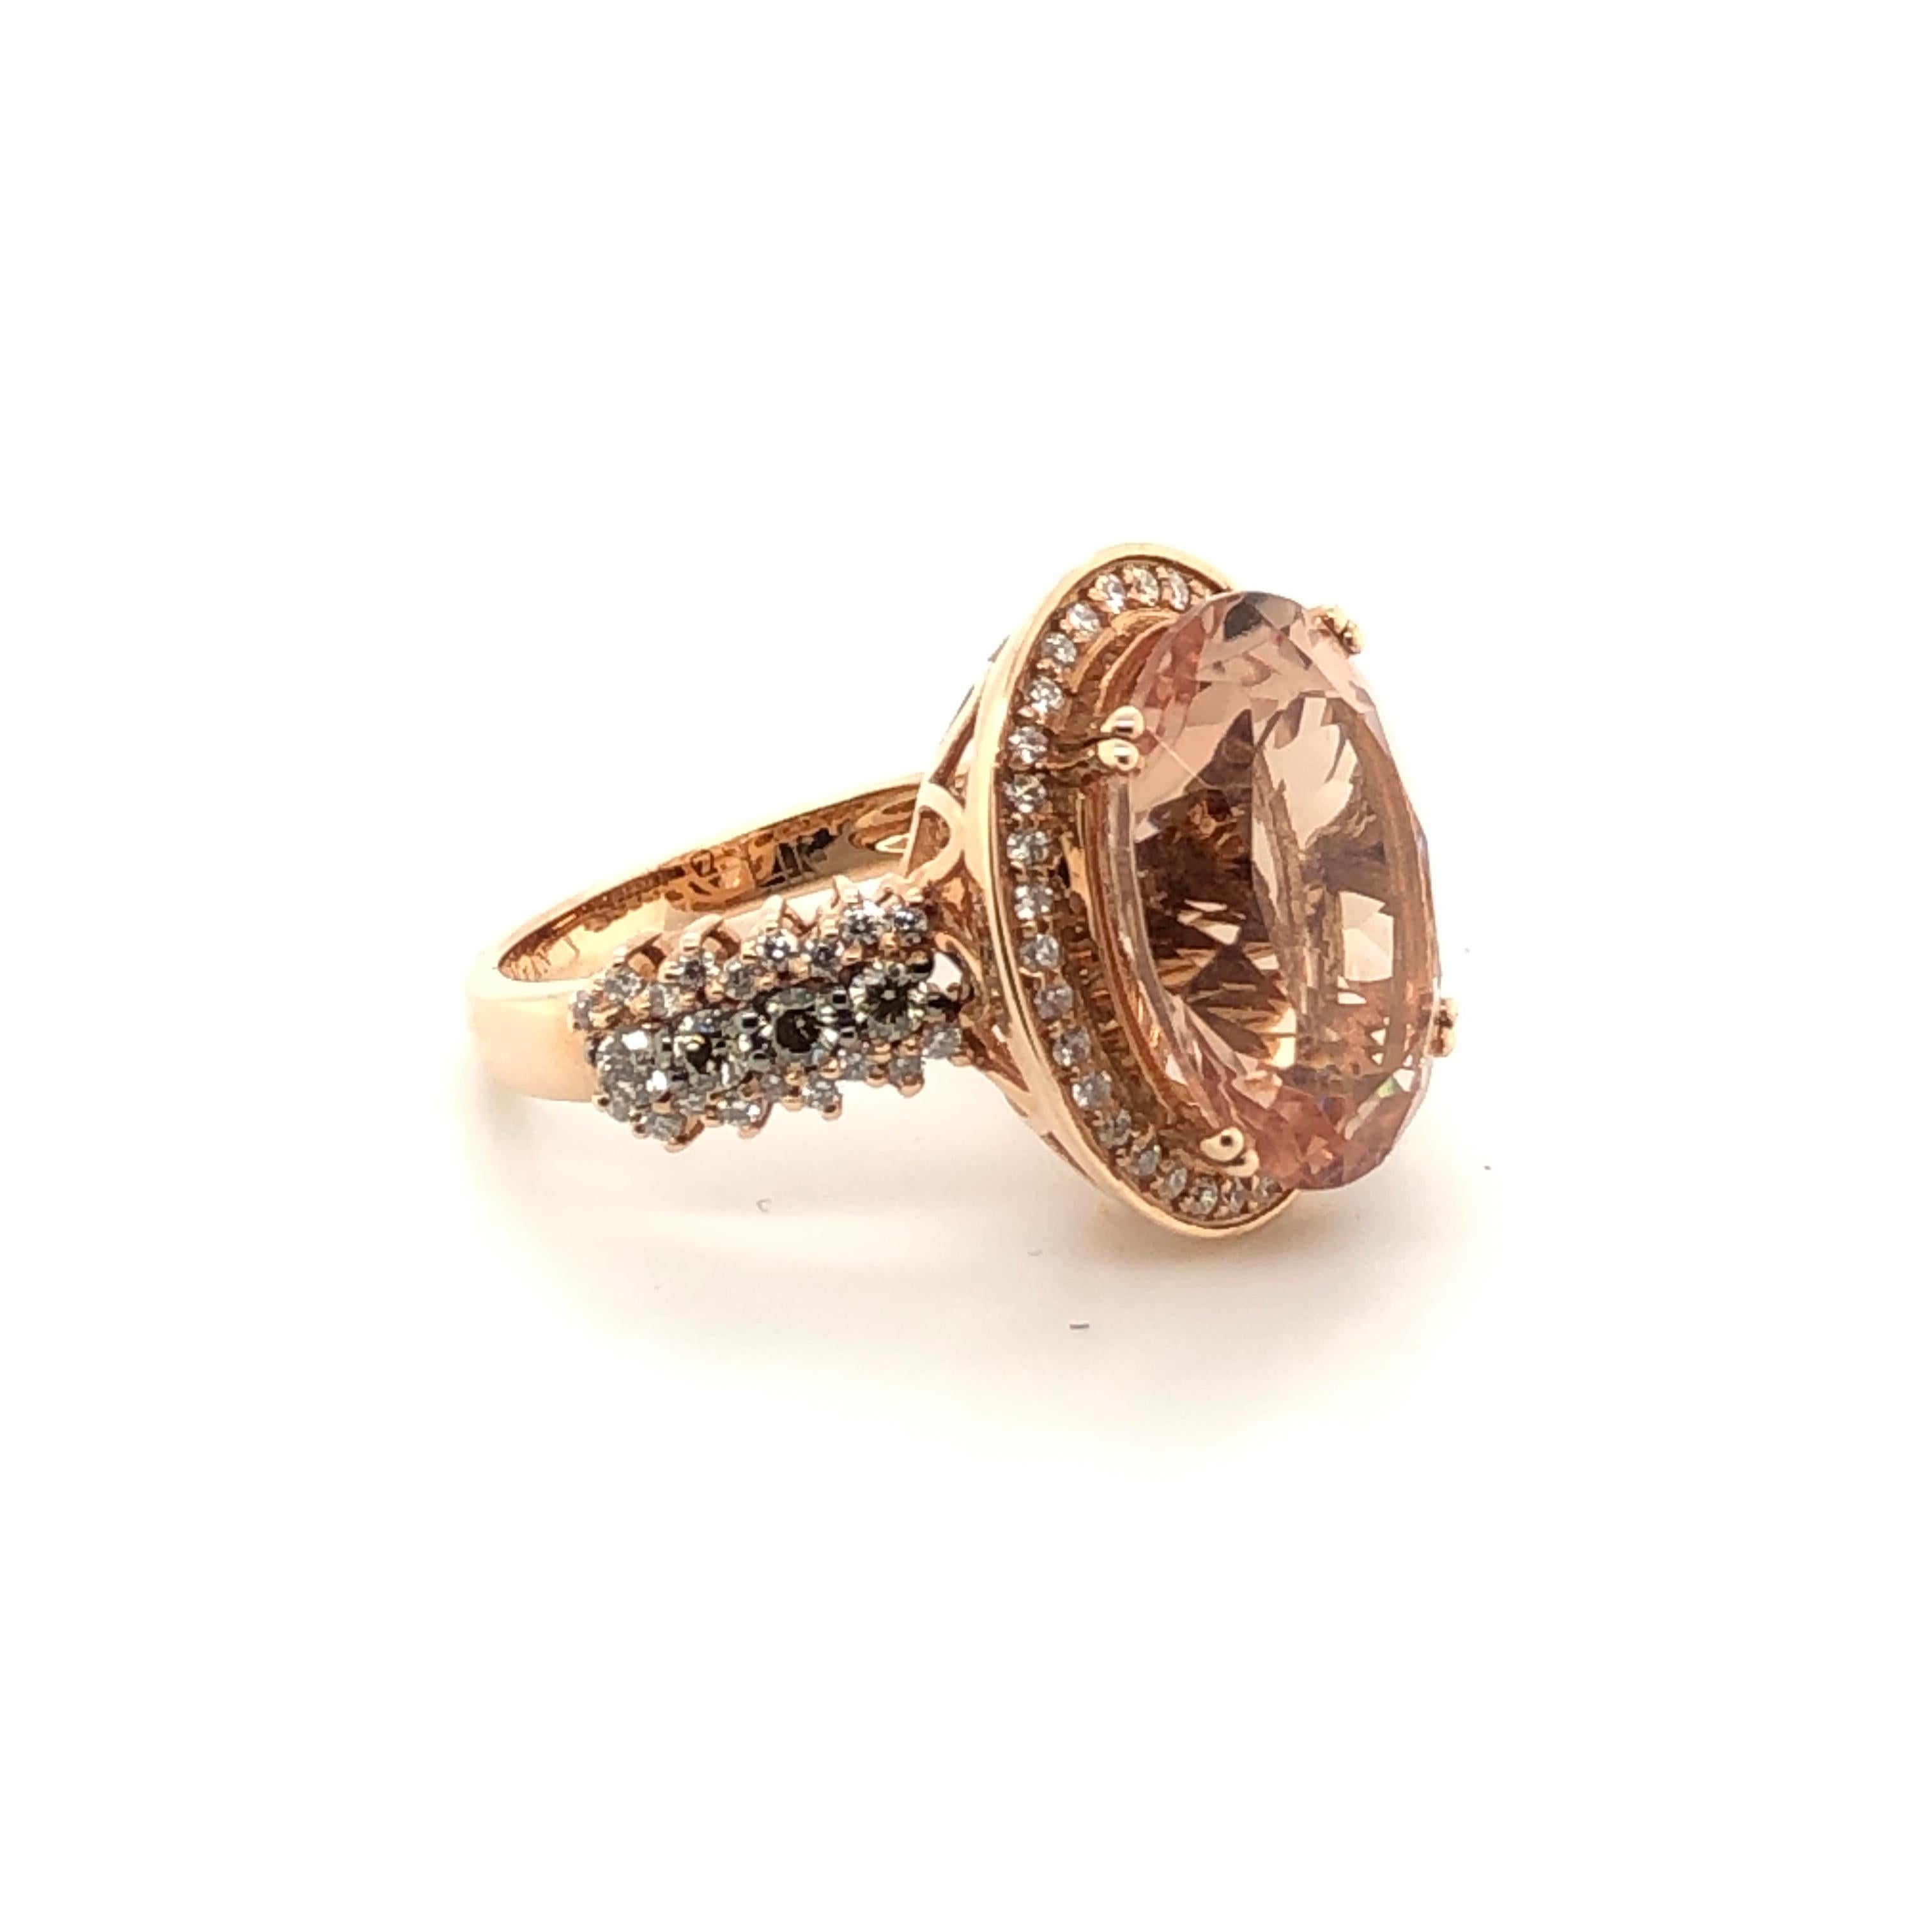 A spectacular 6-7/8 carat oval Peach Morganite stars in this 14K Rose Gold ring from Le Vian Chocolatier® sweetened with accents of 1/3 cts. Chocolate Diamonds (1/3 ct. t.w.) and White Diamonds (3/8 ct t.w.).

Ring Size: 7